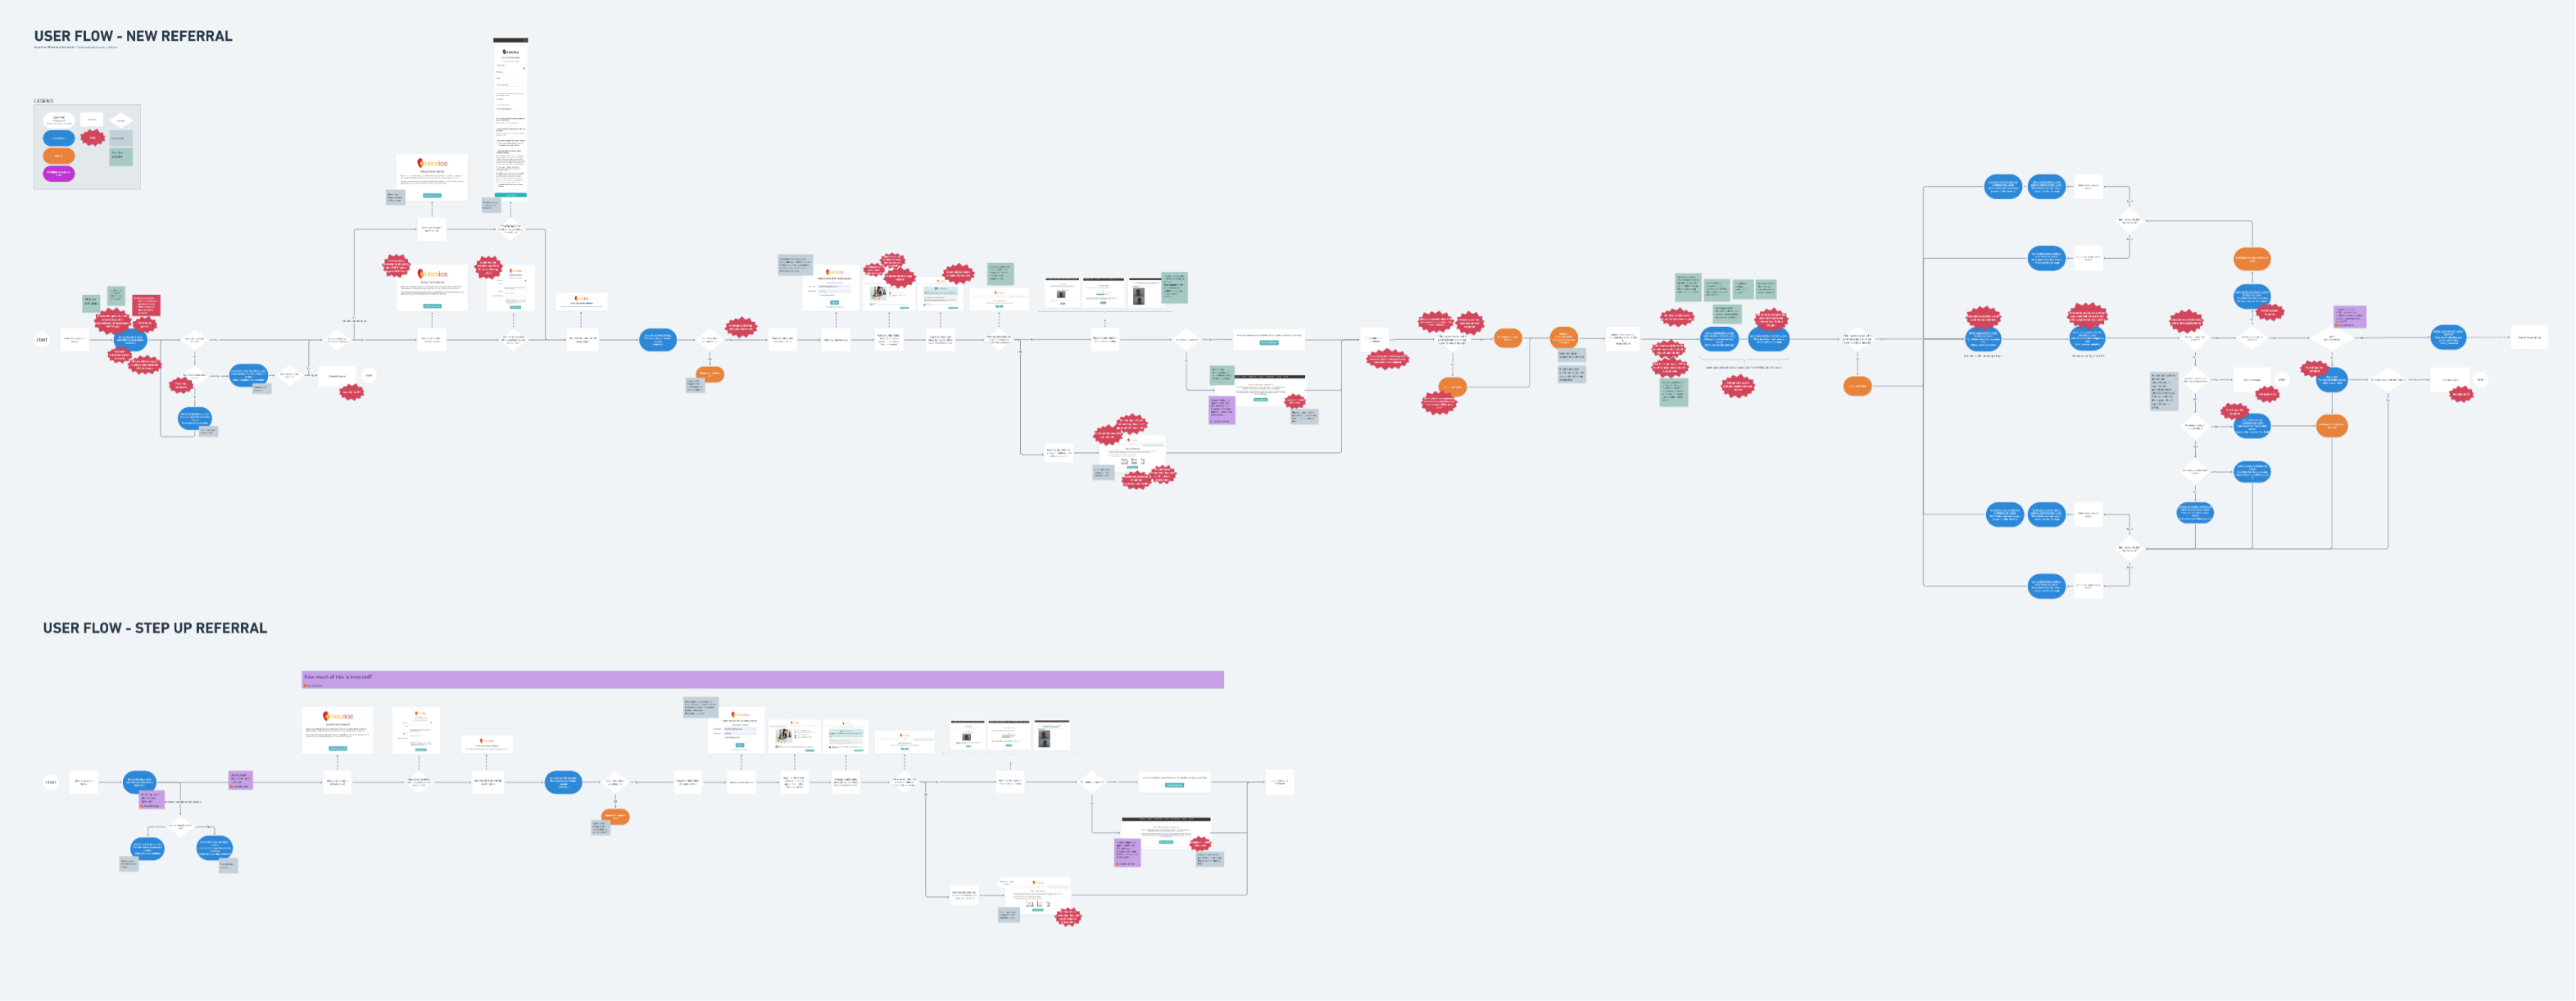 Screen capture of a large and chaotic journey map